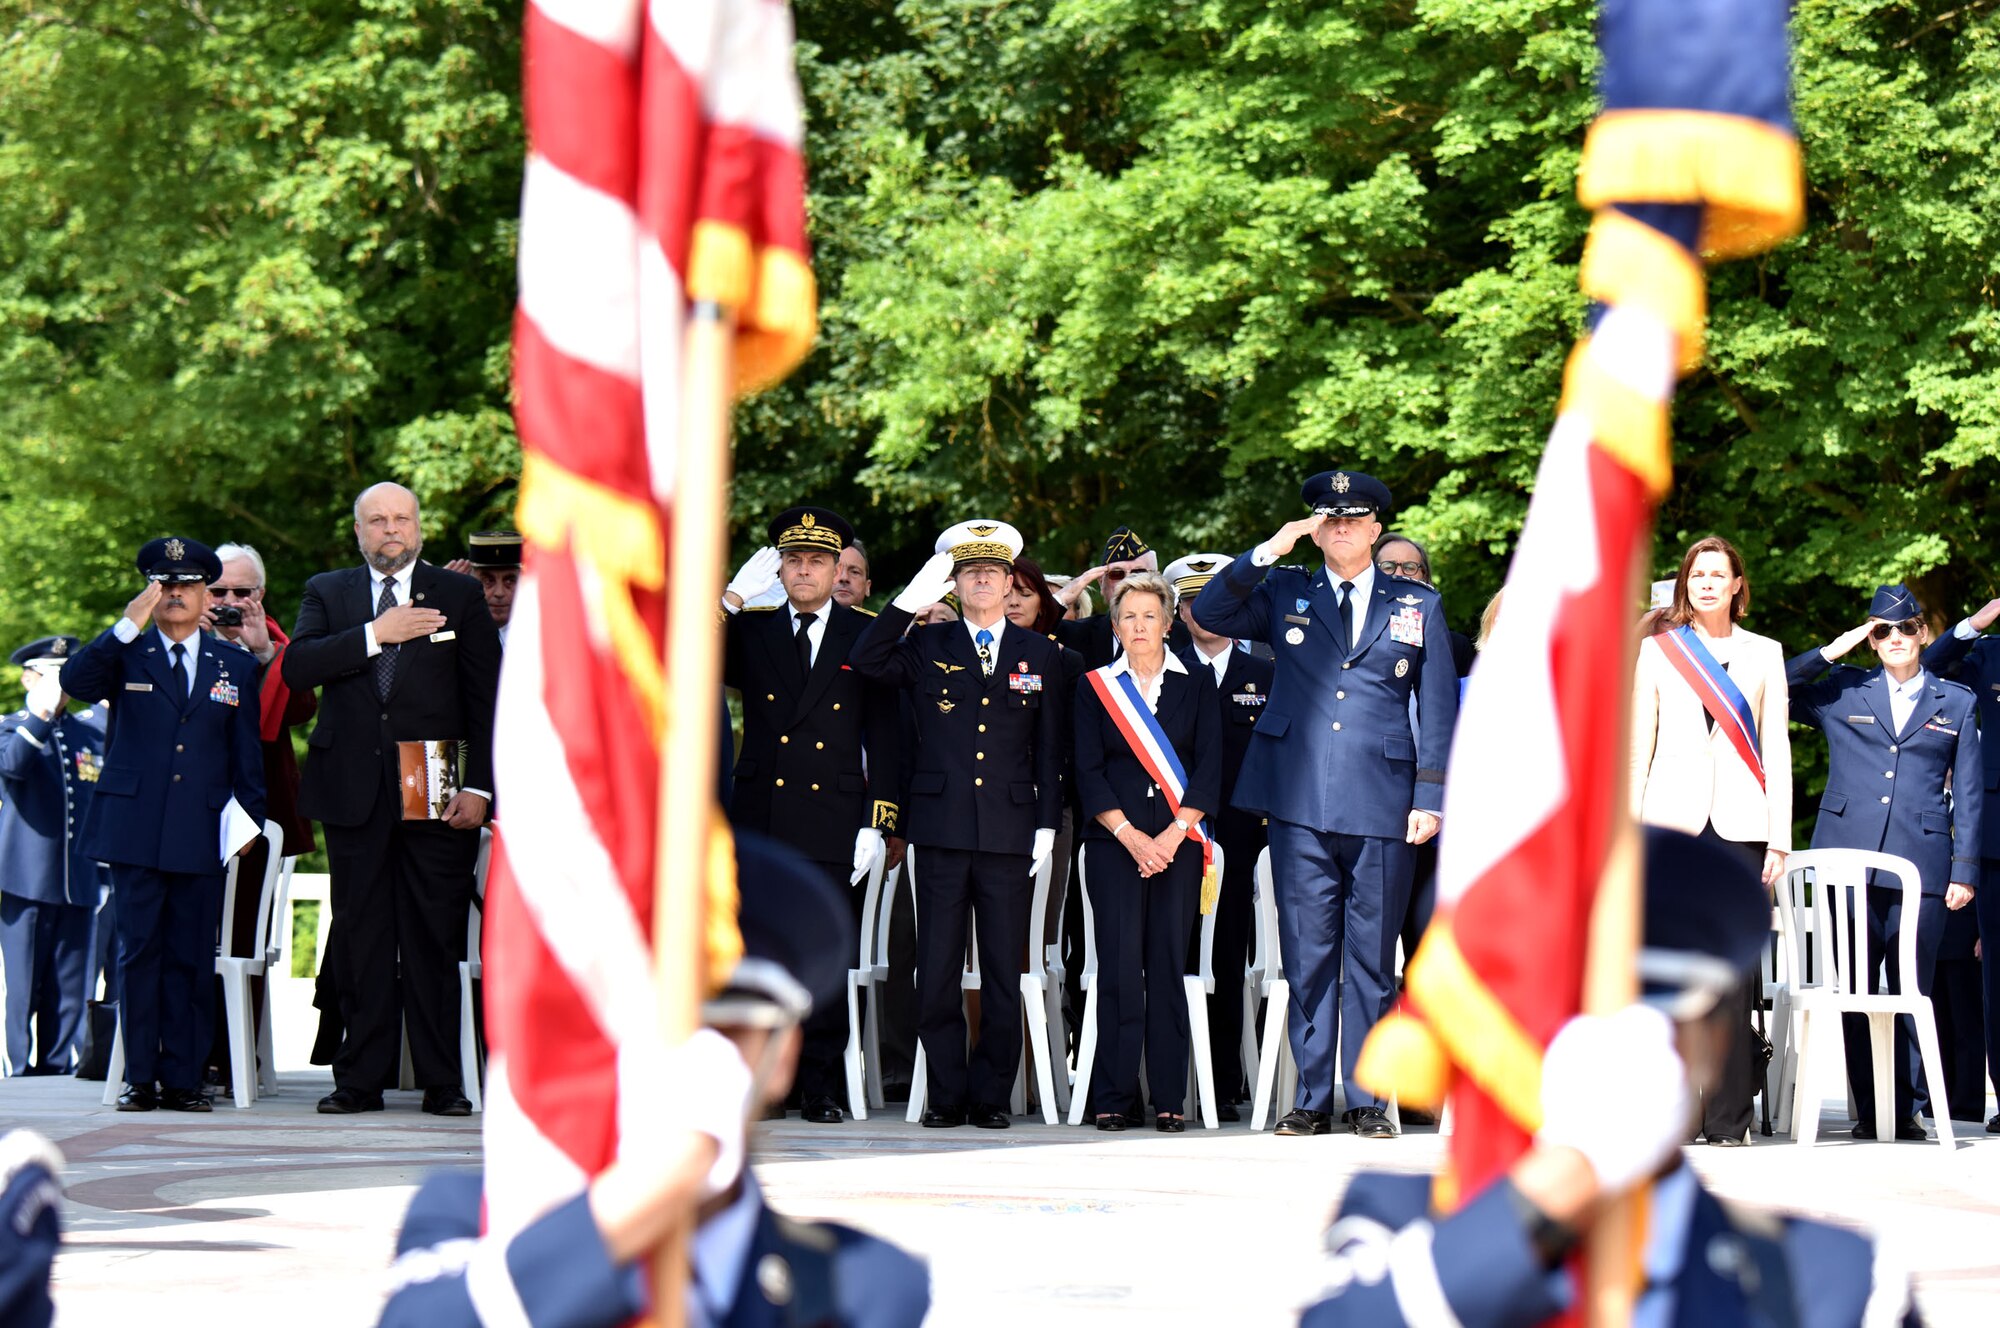 PARIS – U.S. Air Force Gen. Frank Gorenc, U.S. Air Forces in Europe-Air Forces Africa commander, Christiane Barody-Weiss, Mayor of Marnes-la-Coquette, France, French Gen. Bernard Schuler, French Strategic Air Forces Command commander, and Mr Yann Jounot, Prefect of the Hauts-de-Seine, render honors during the American National Anthem in a Memorial Day ceremony at the Lafayette Escadrille Memorial, in Marnes-la-Coquette, France, May 28, 2016.  Each offered a speech commemorating the shared sacrifices of French and American force, and recognizing the enduring relationship the two countries have maintained for more than 240 years.(U.S. Air Force photo by Senior Master Sgt. Brian Bahret/Released) 